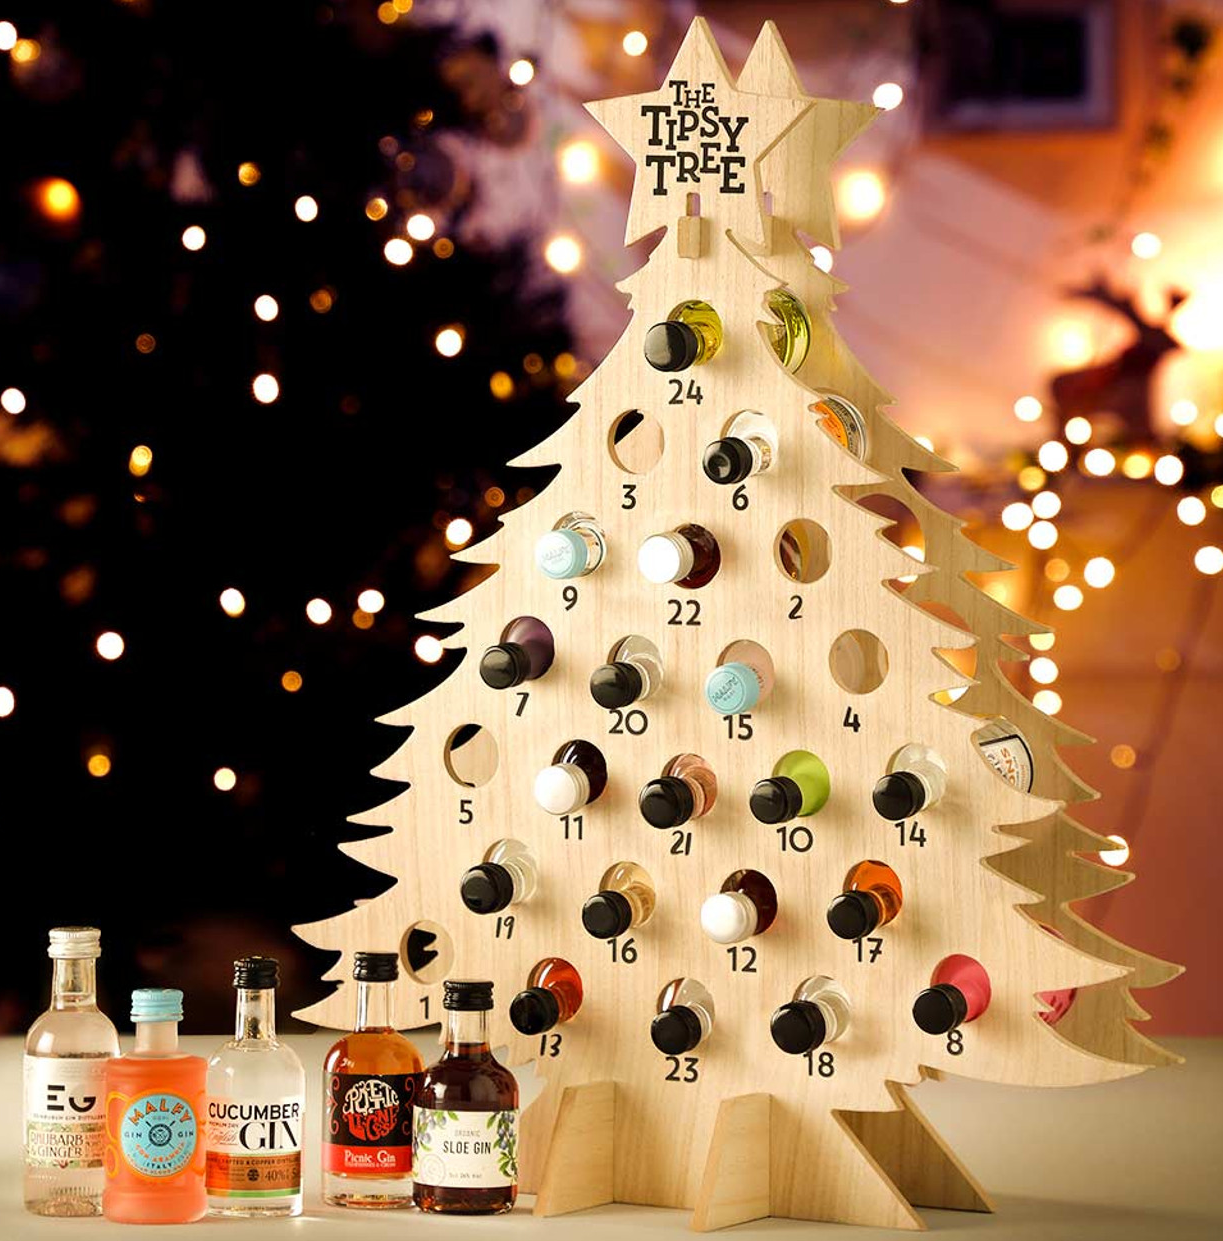 The Tiny Tipsy Tree with Gin Advent Calendar - Inhalt Content (EN)